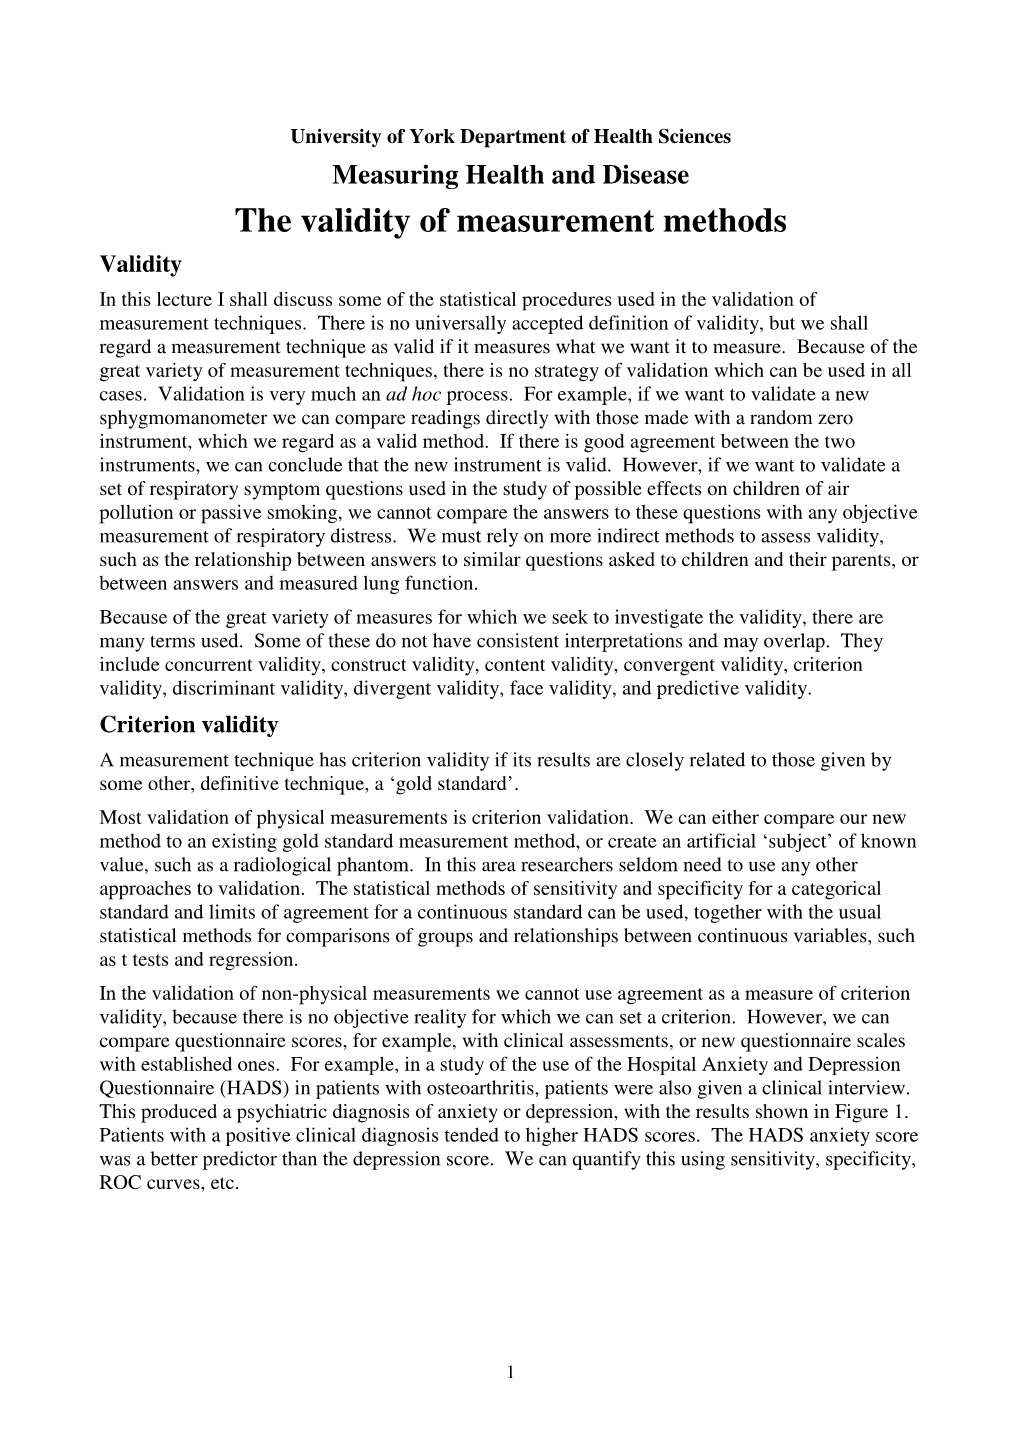 The Validity of Measurement Methods, Text Version